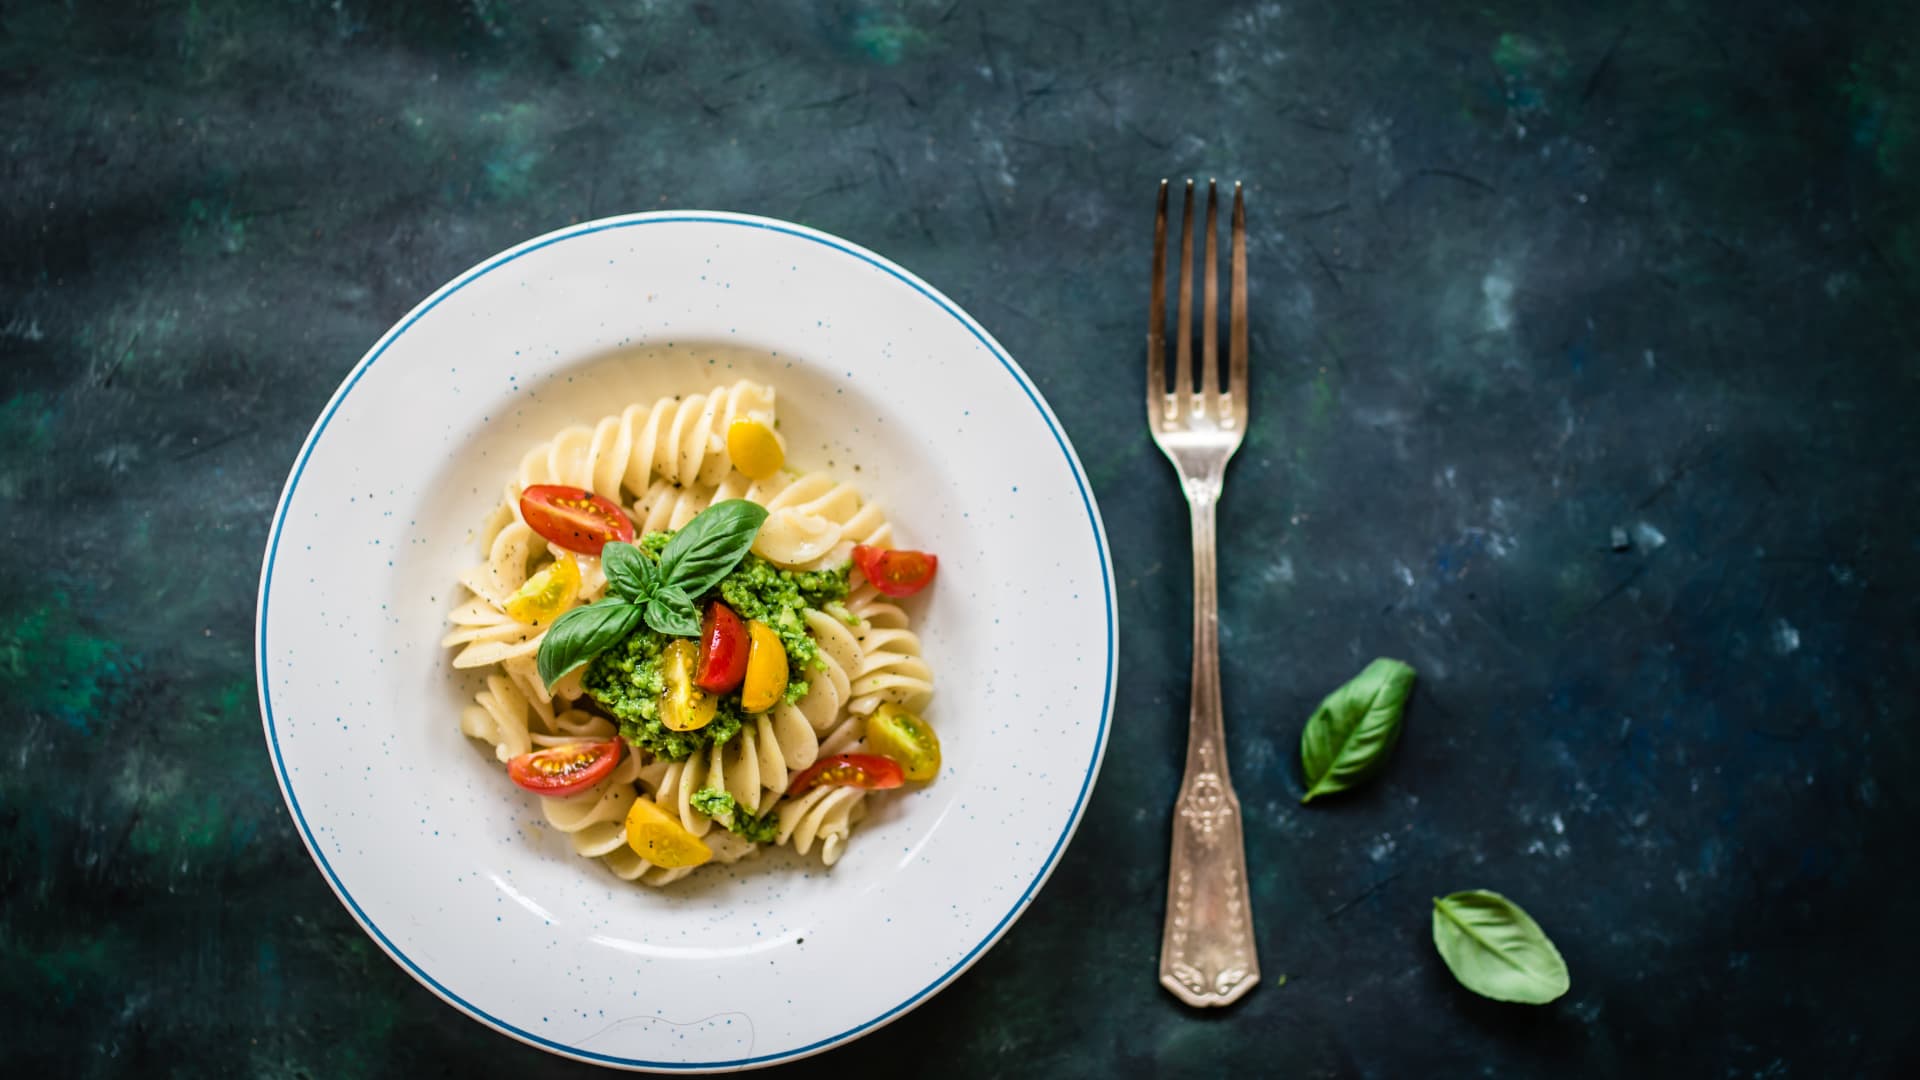 Plant foods like pasta contain various B vitamins that support energy levels.